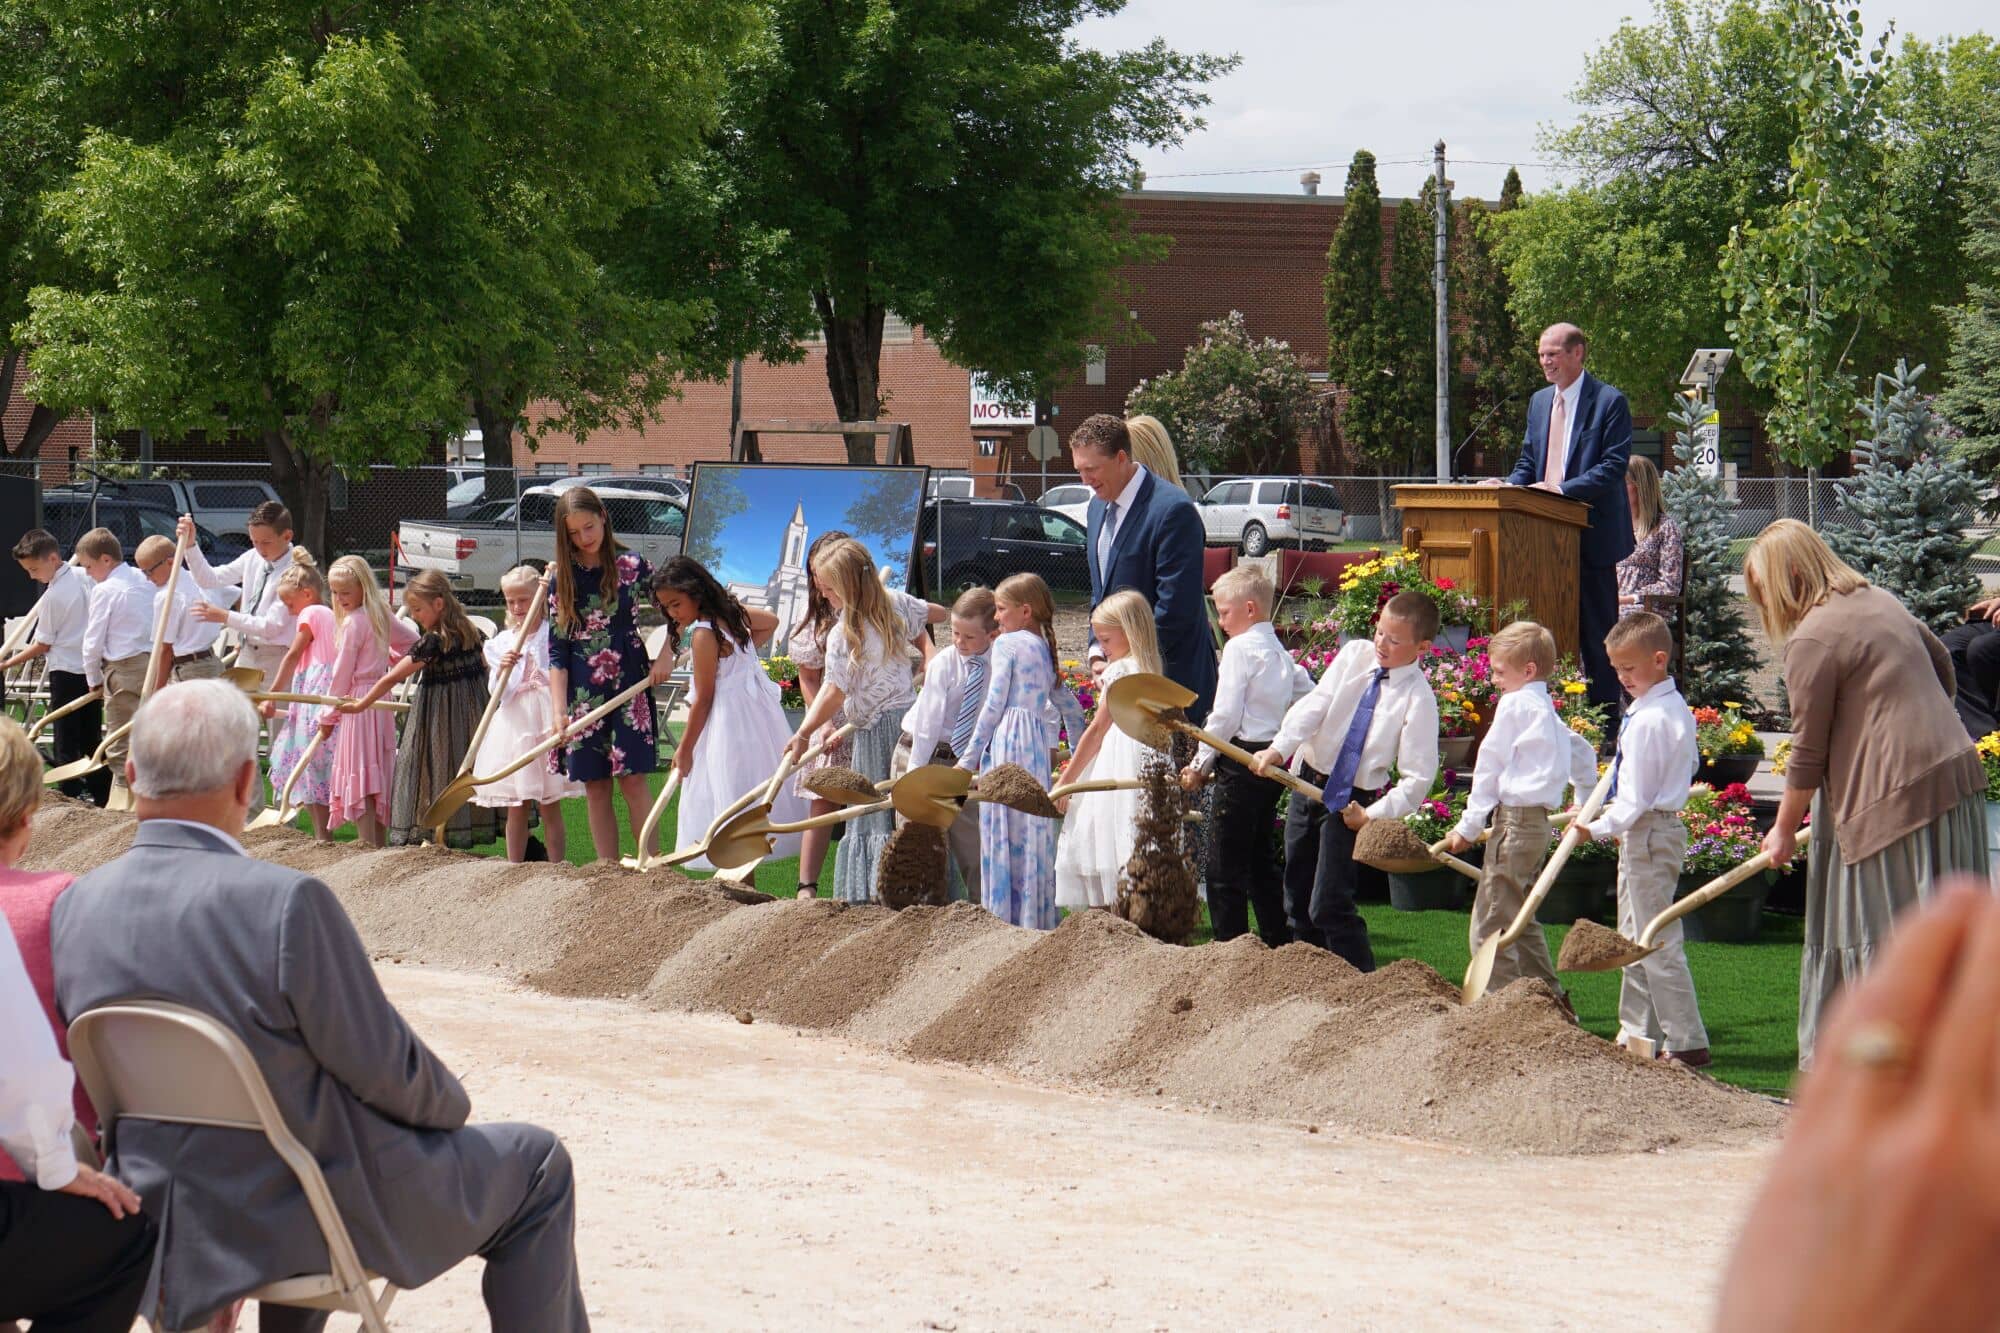 A row of Primary-aged boys and girls in Sunday best holding ceremonial golden shovels with a scoop of dirt.